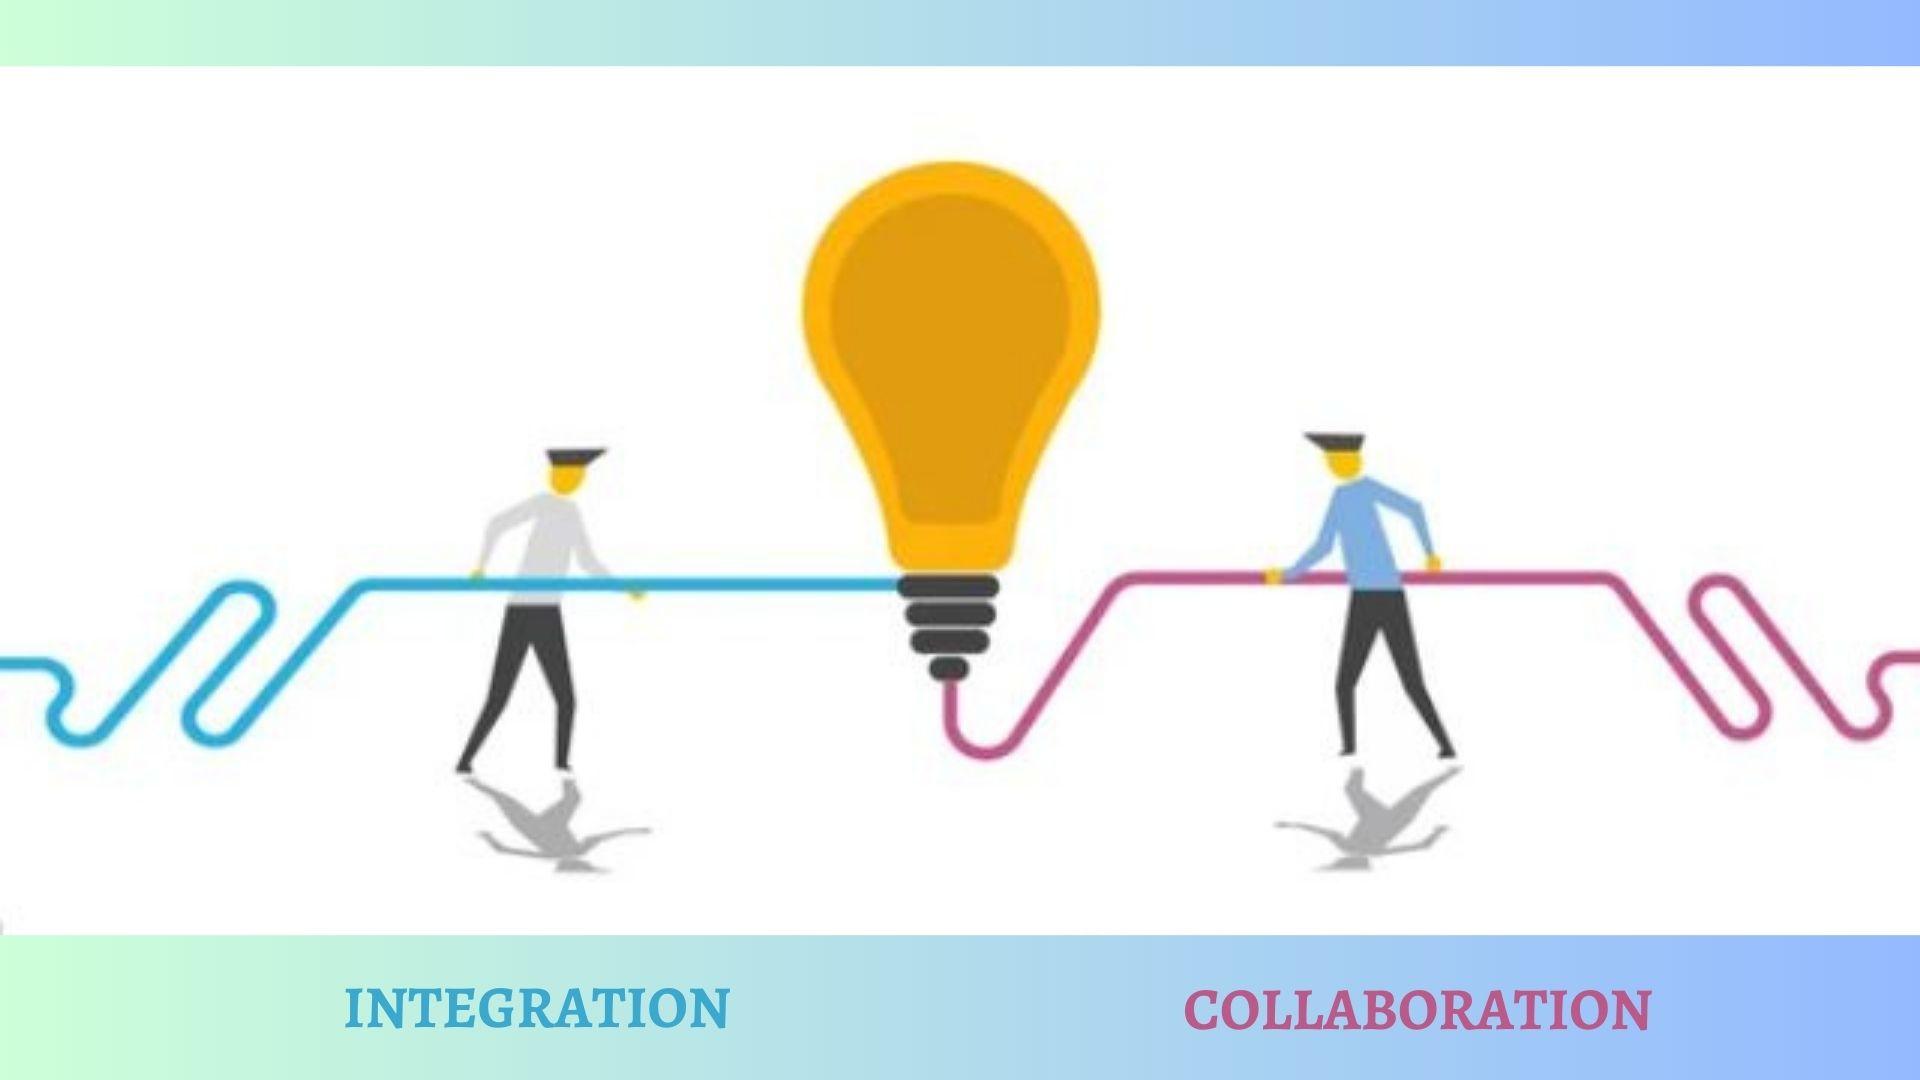 Collaboration and Integration